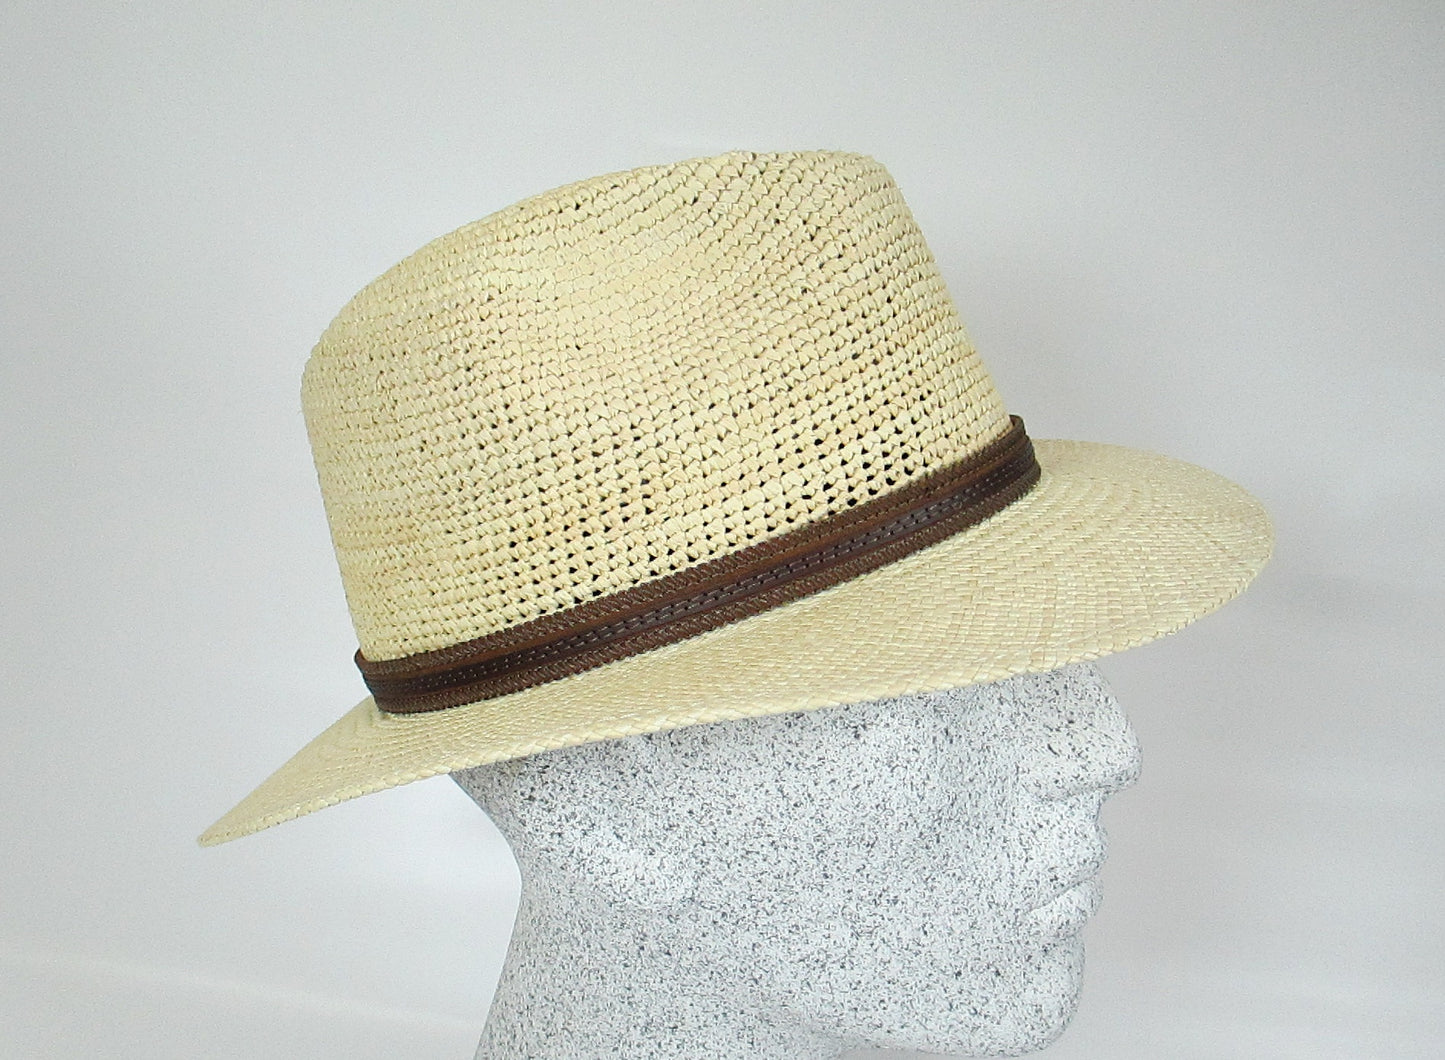 Panama with crochet head and leather strap